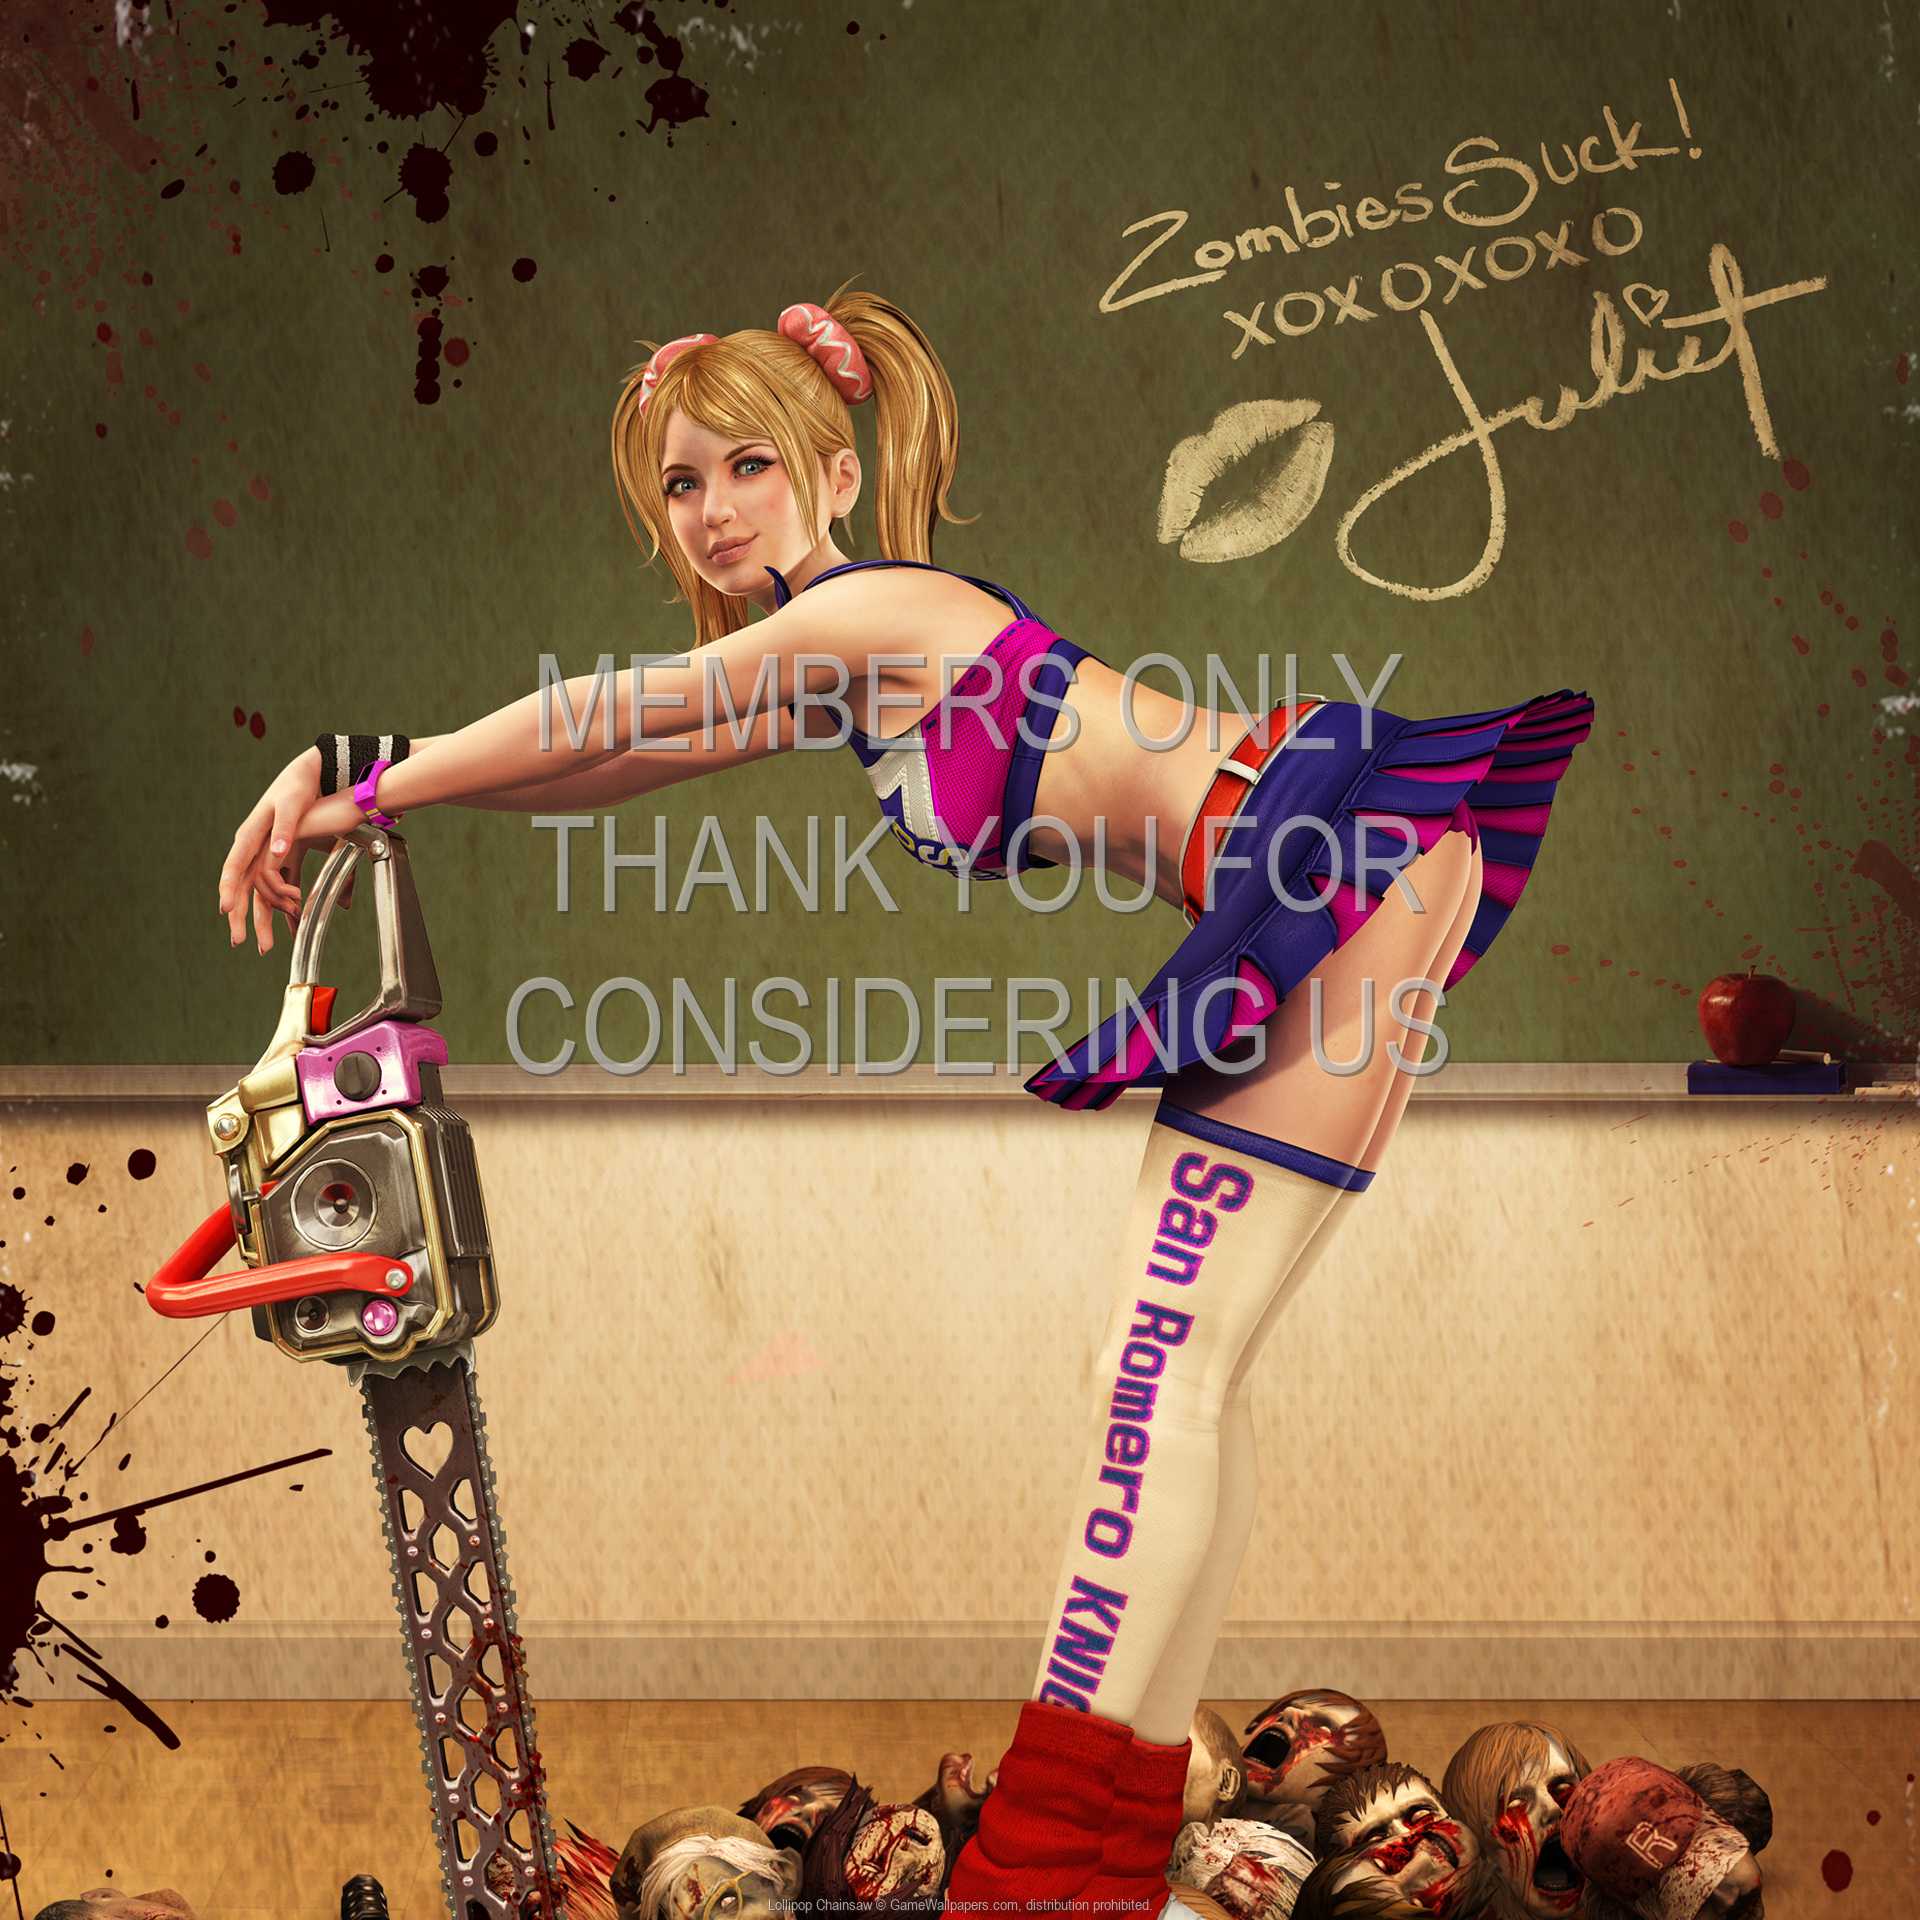 Lollipop Chainsaw 1080p%20Horizontal Mobile wallpaper or background 02